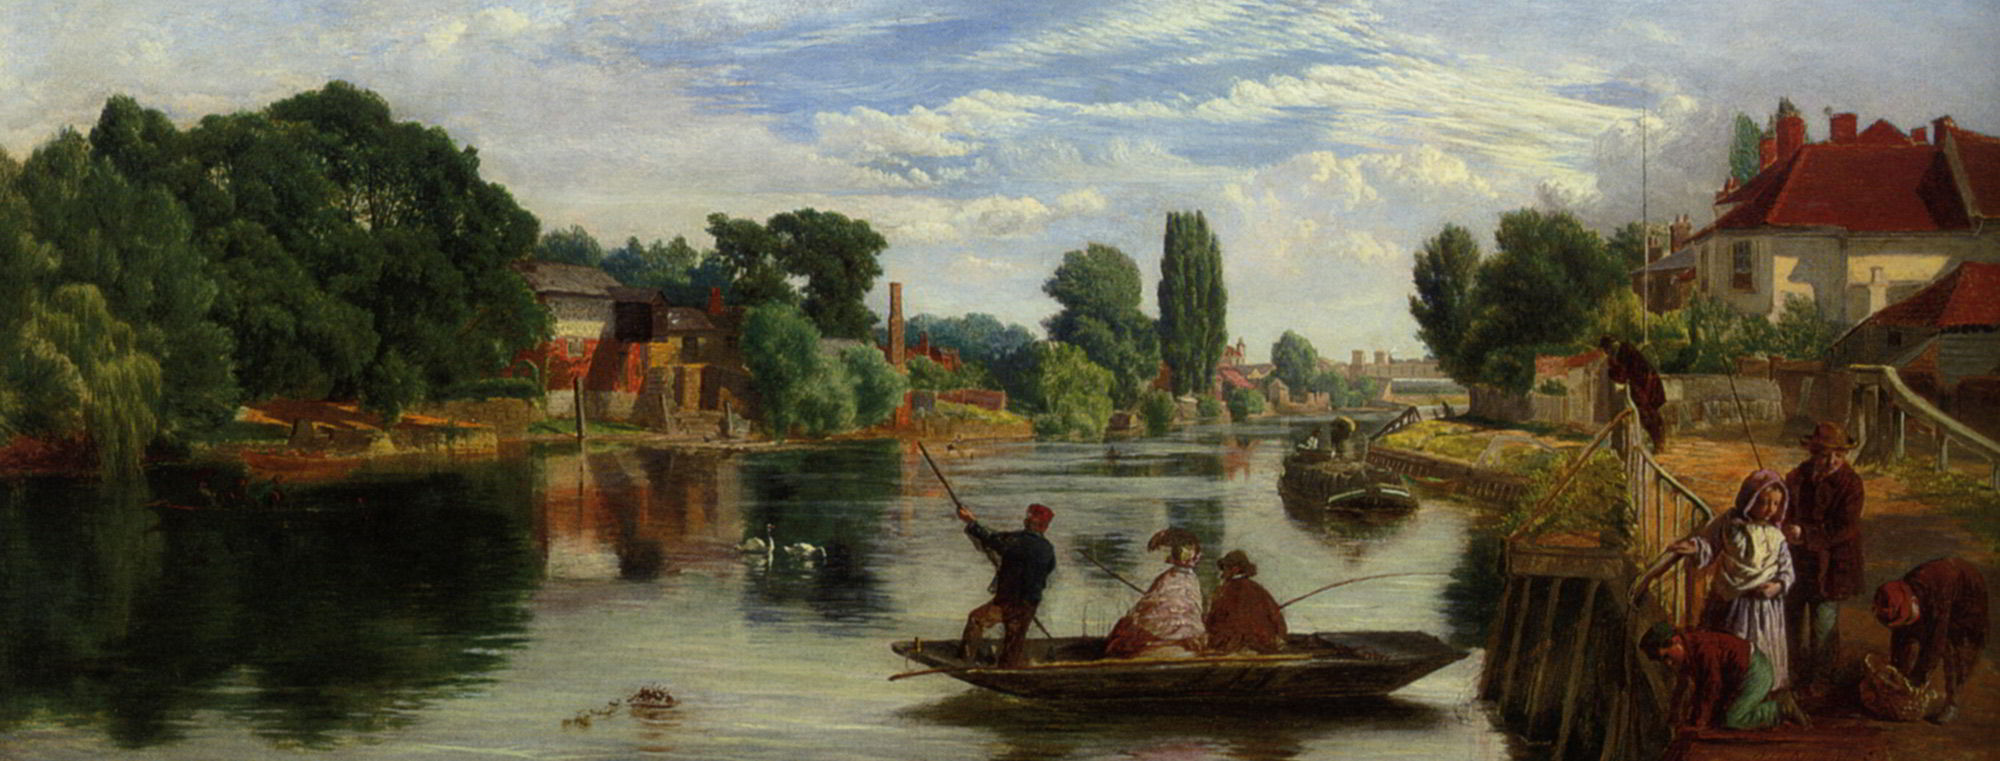 On The Thames by William Henry Knight